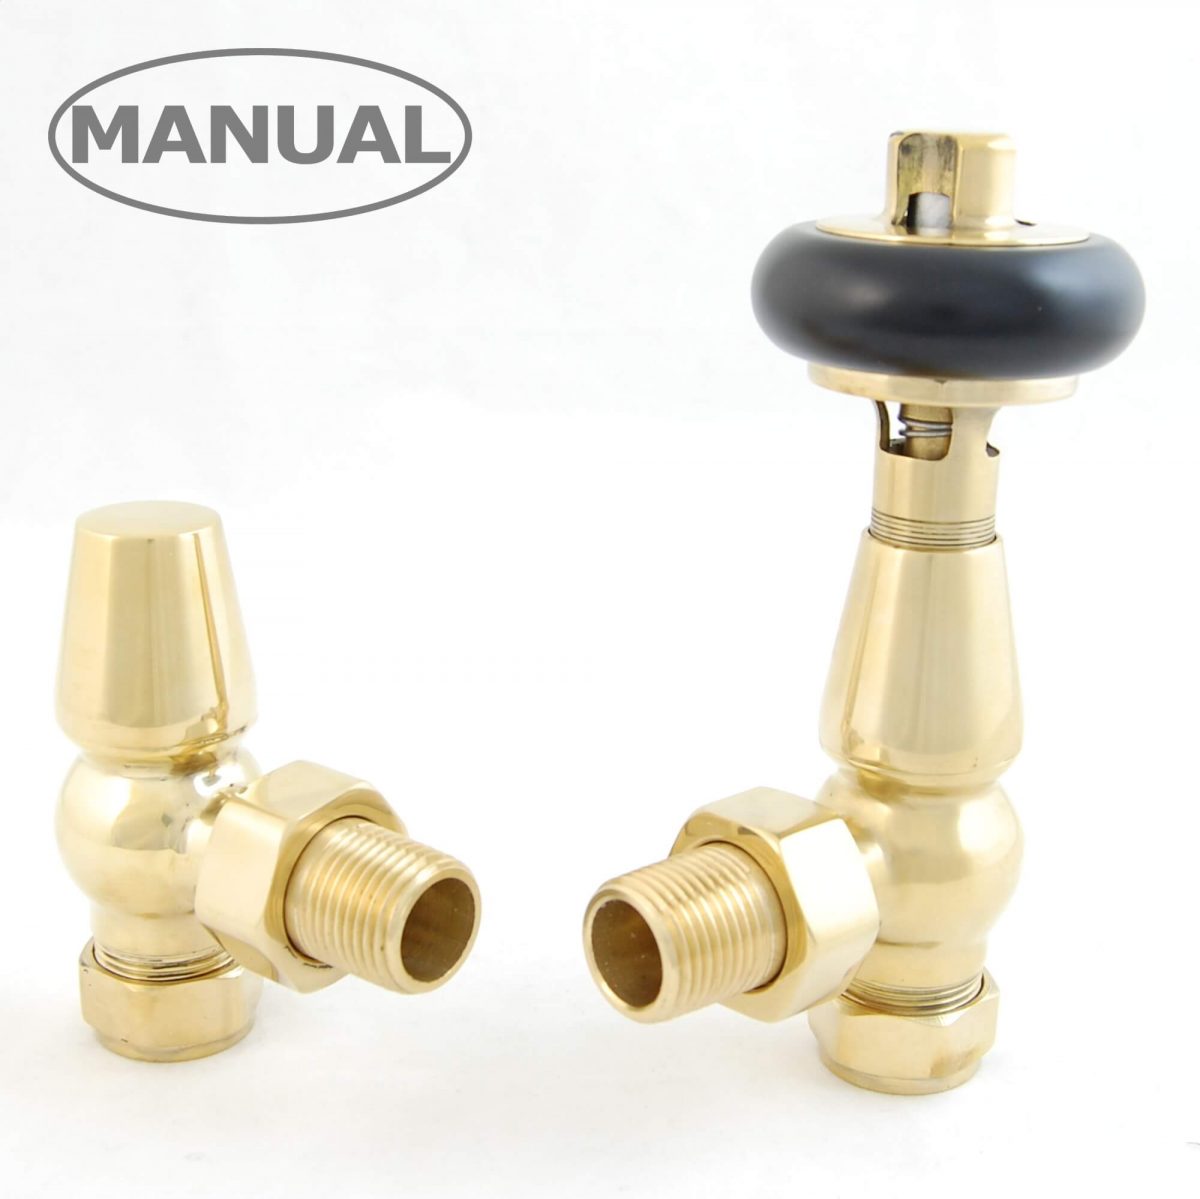 Eton Traditional Radiator Valve - Un-Lacquered Brass (Angled Manual)